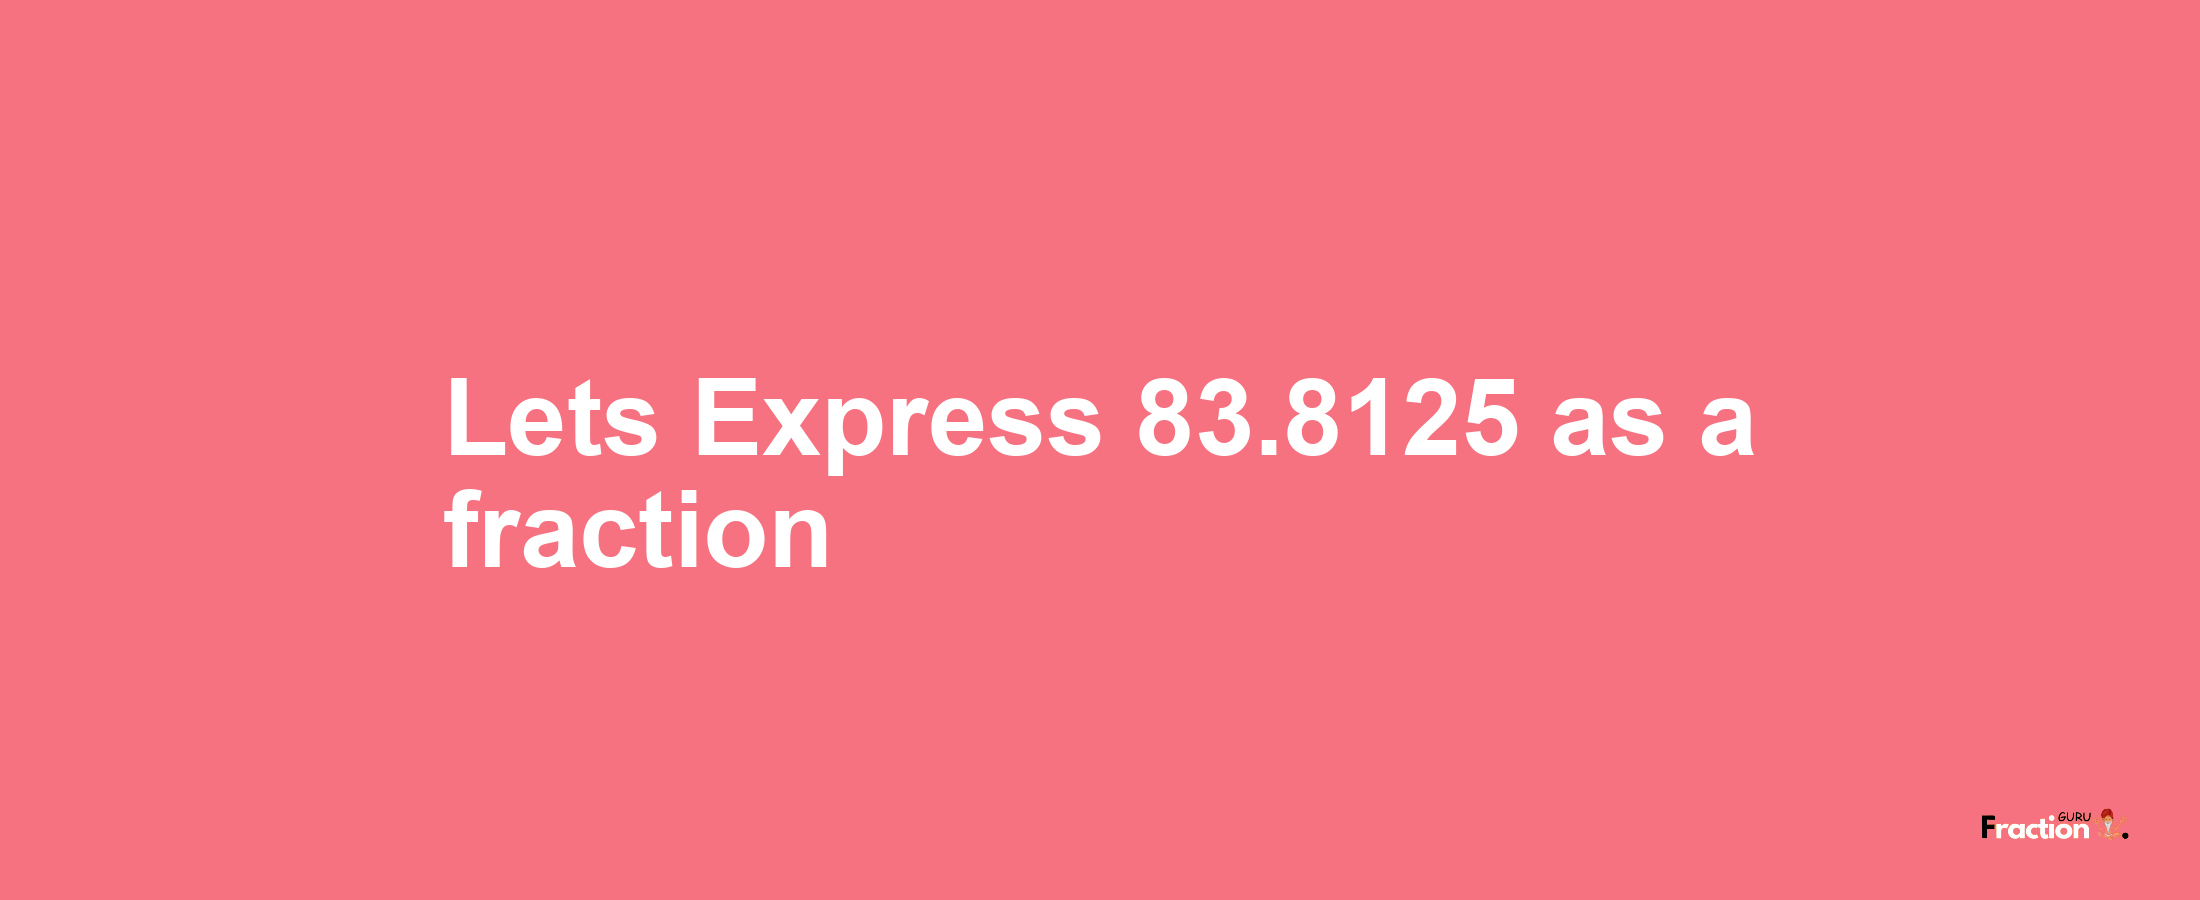 Lets Express 83.8125 as afraction